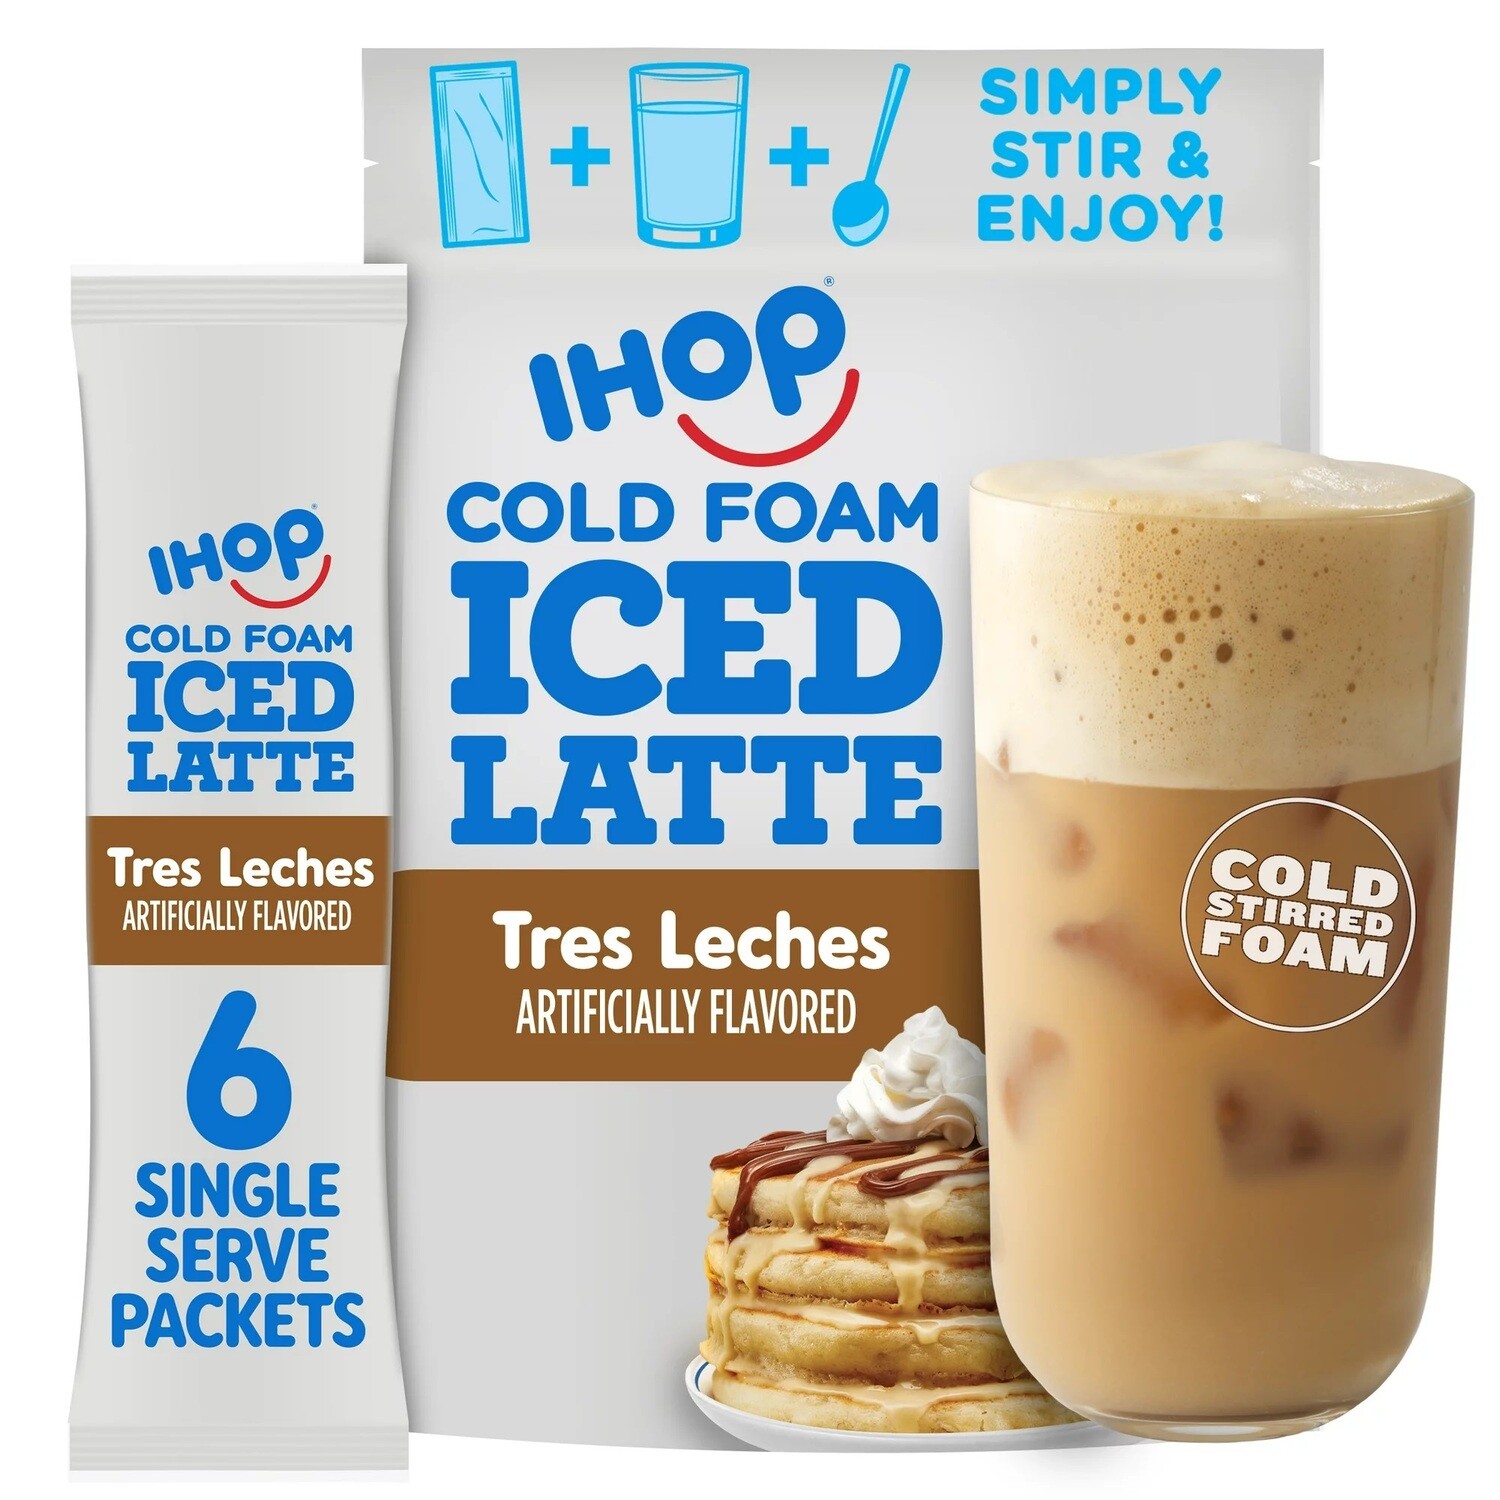 IHOP Cold Foam Iced Latte - Tres Leches